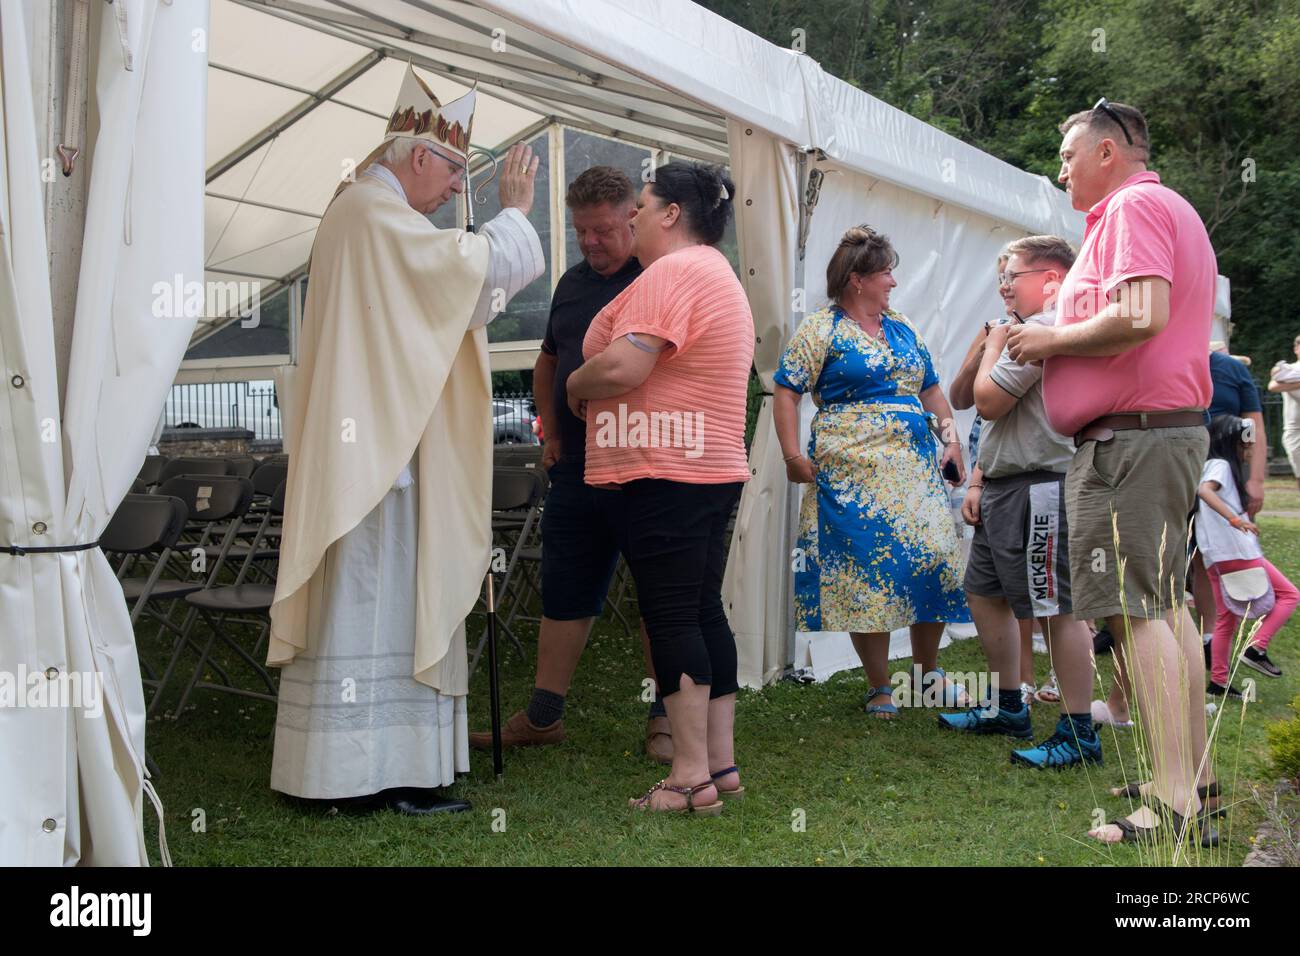 Open air church service  Catholic Bishop of Wrexham, the Right Reverend Peter M Brignall. He is blessing devout Catholic Irish Travellers after the service at Saint Winefride's Feast Day Pilgrimage. Holywell, Flintshire, Wales 25th June 2023. 2000s UK HOMER SYKES Stock Photo